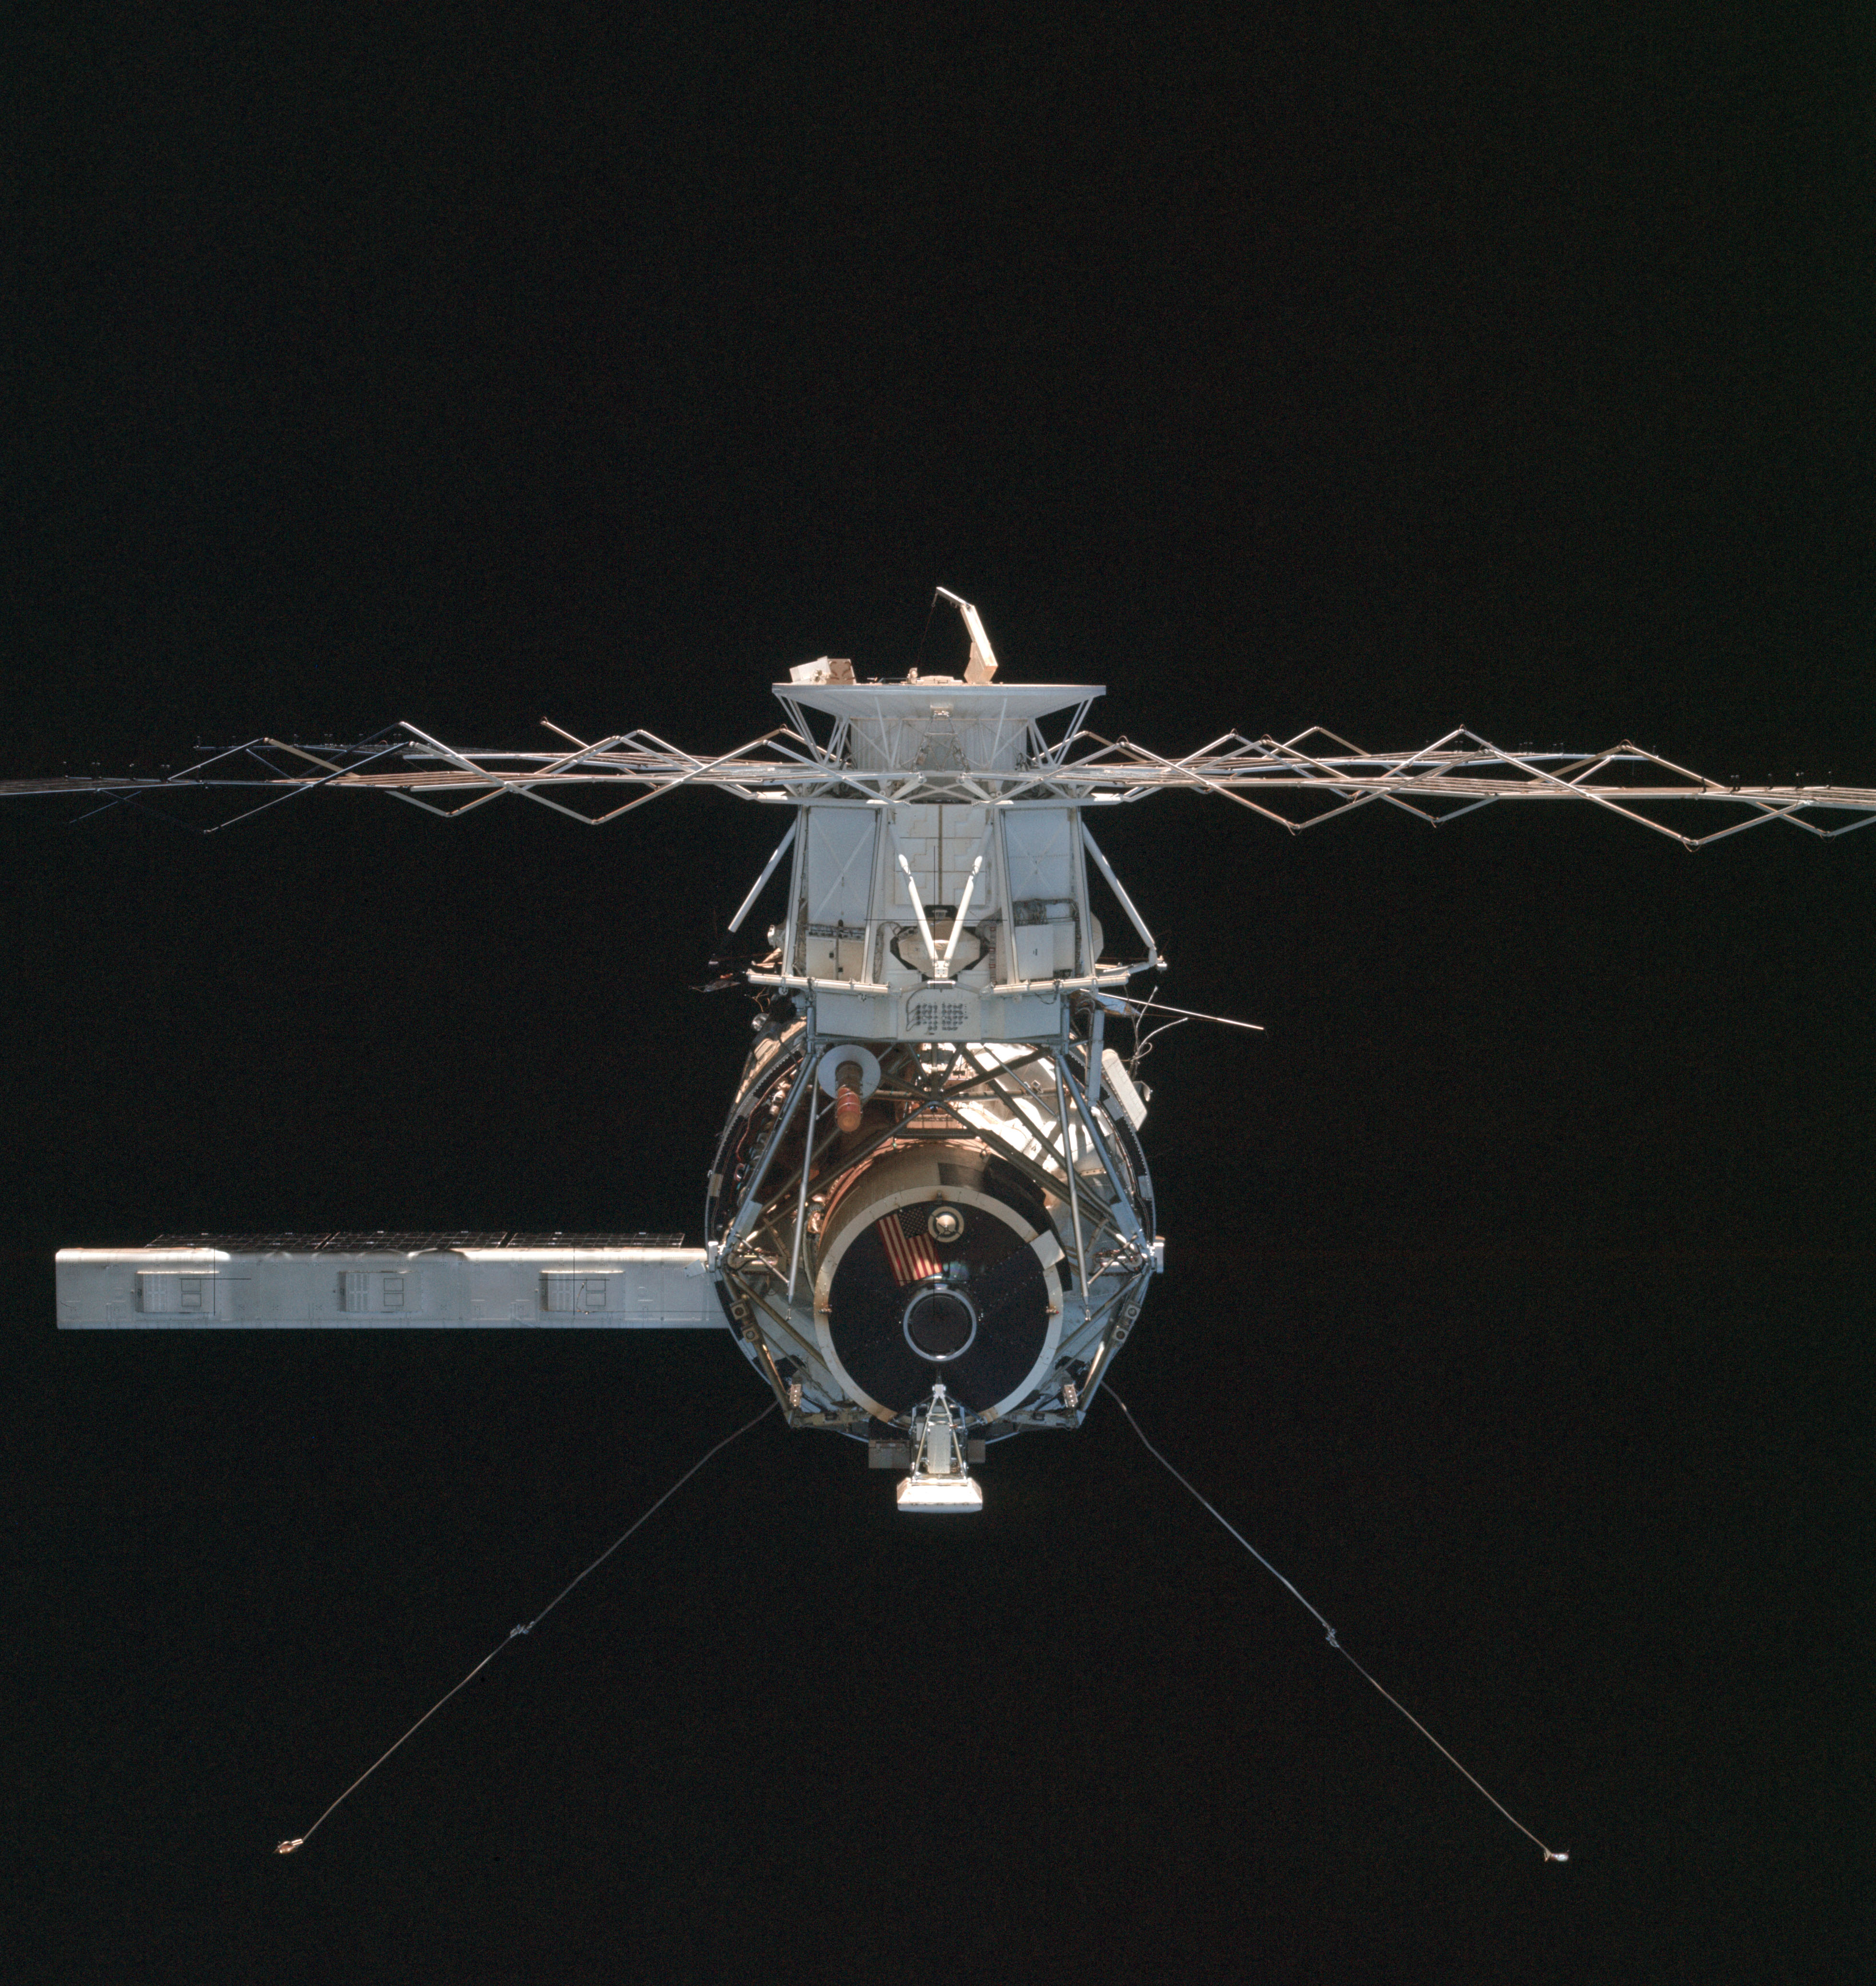 View from the Skylab 4 Command and Service Module